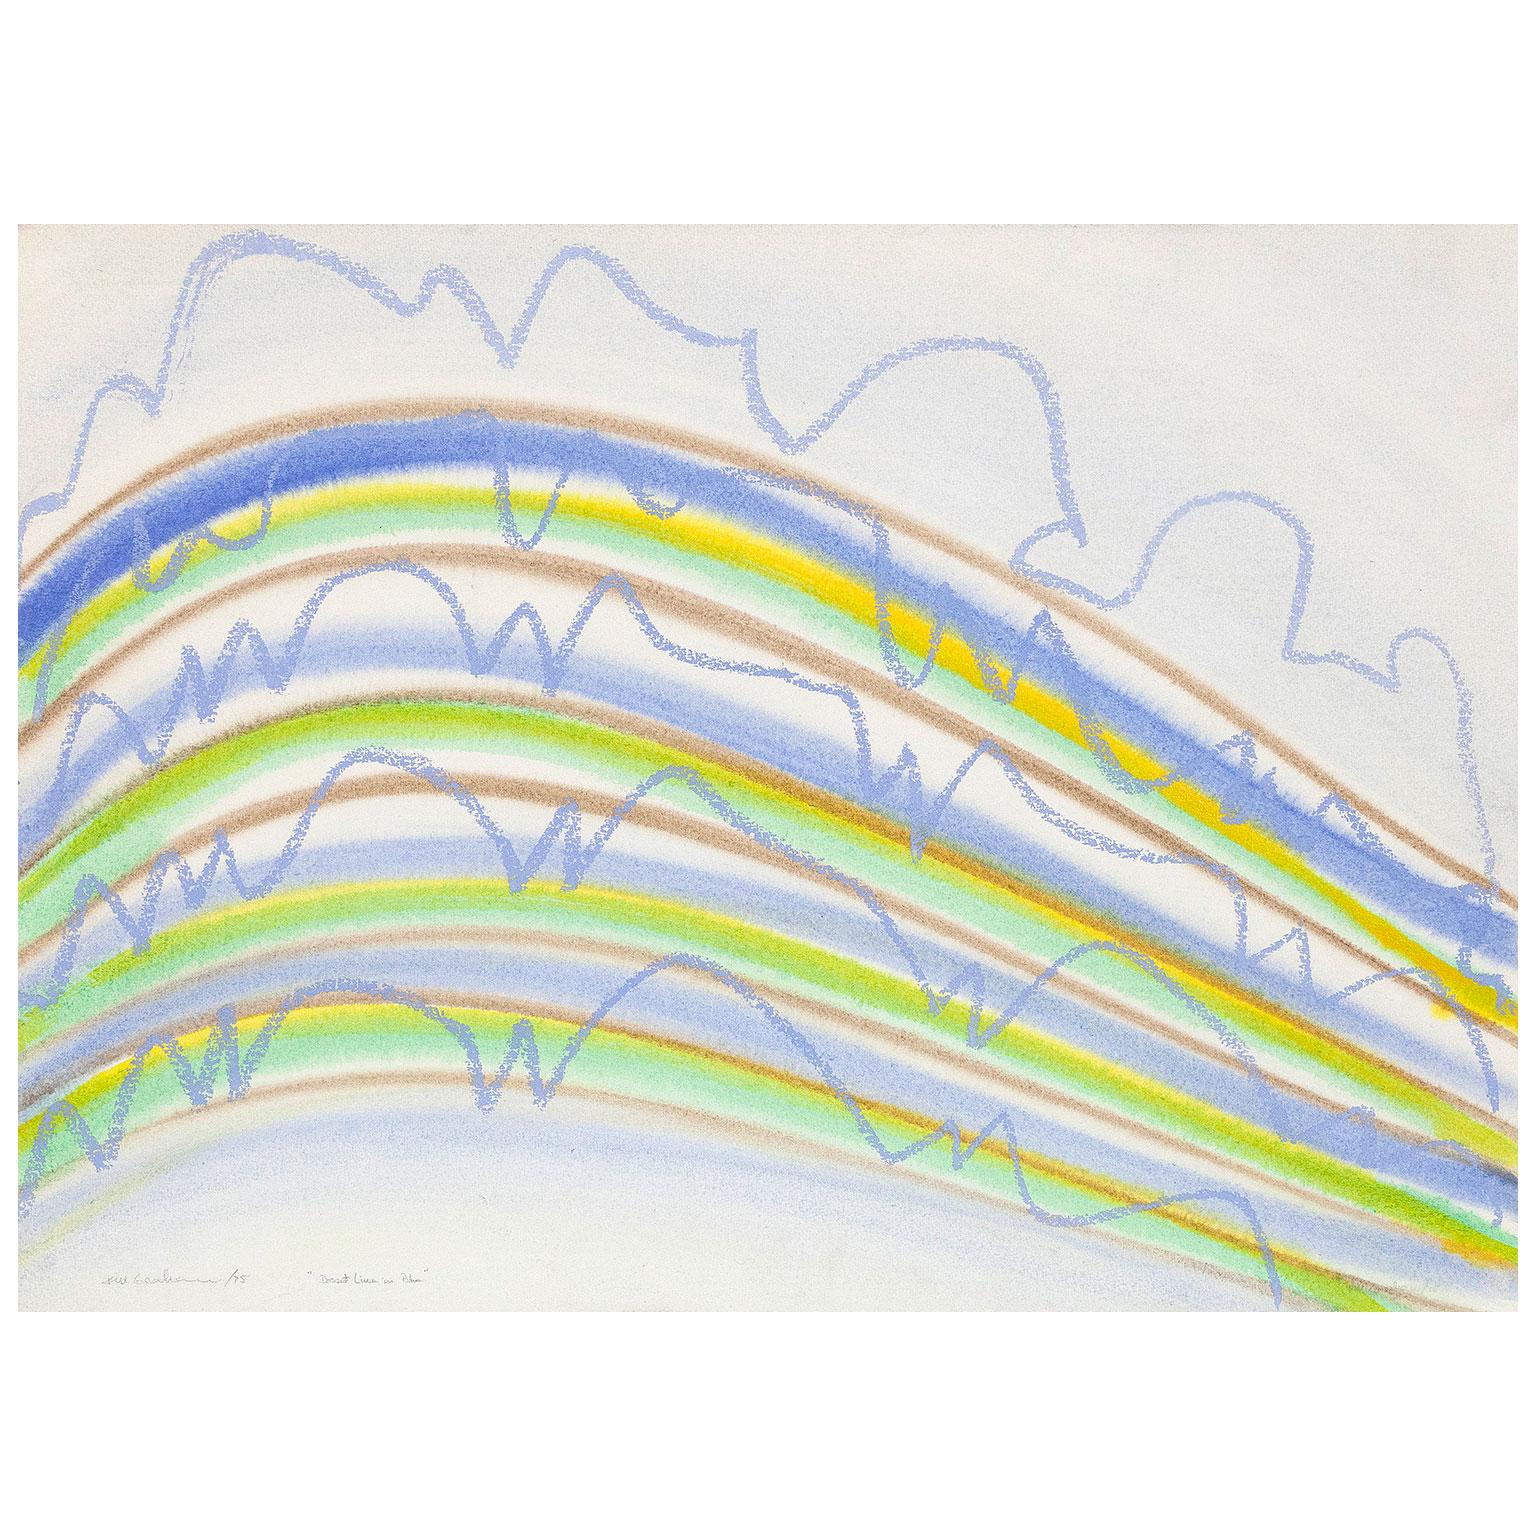 Like Gershon Iskowitz, KM Graham is known for her uplifting, dynamic and colorful interpretations of landscapes.

Kathleen Margaret (aka KM) Graham was born in Hamilton in 1932 (and died in Toronto in 2008). Graham was an anomaly in Canada for a